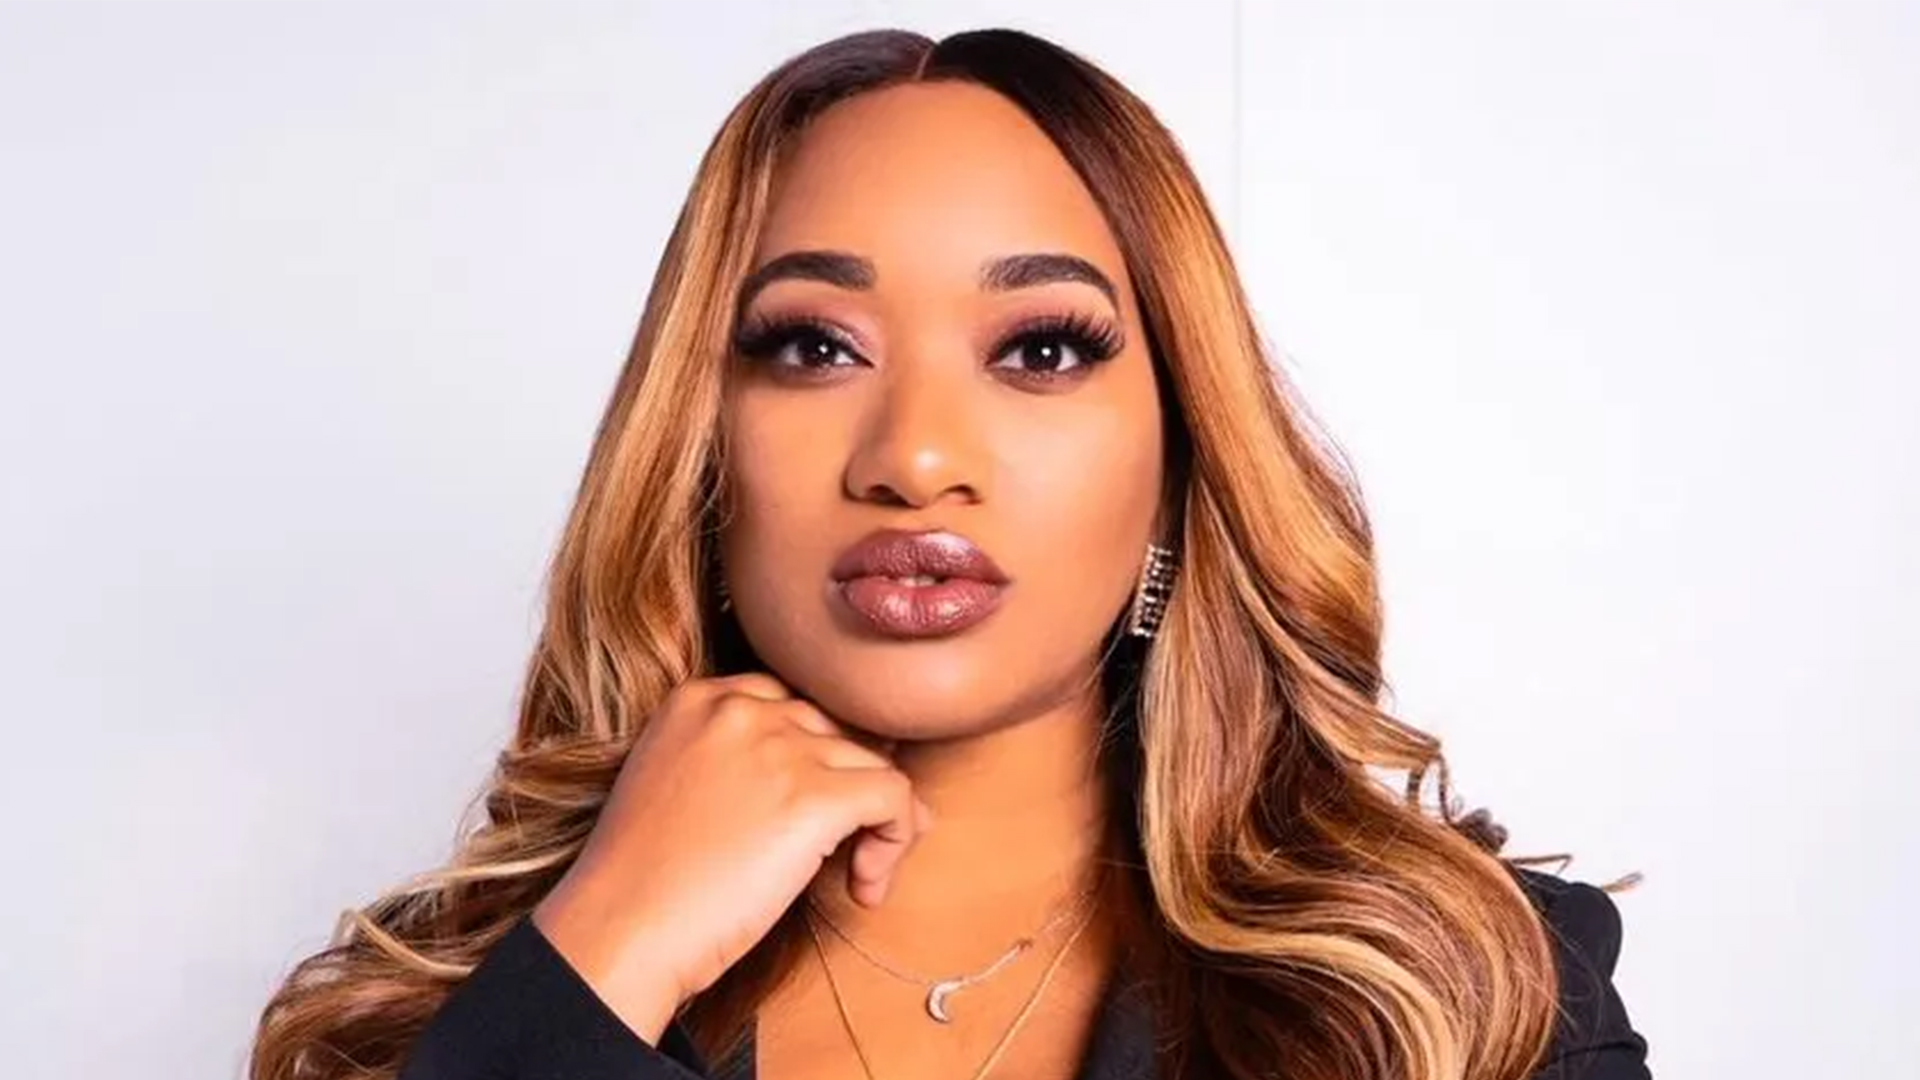 Founder Of Canvas Beauty Shares That She Has Become The First Known Person To Earn $1M Through A Single TikTok Live